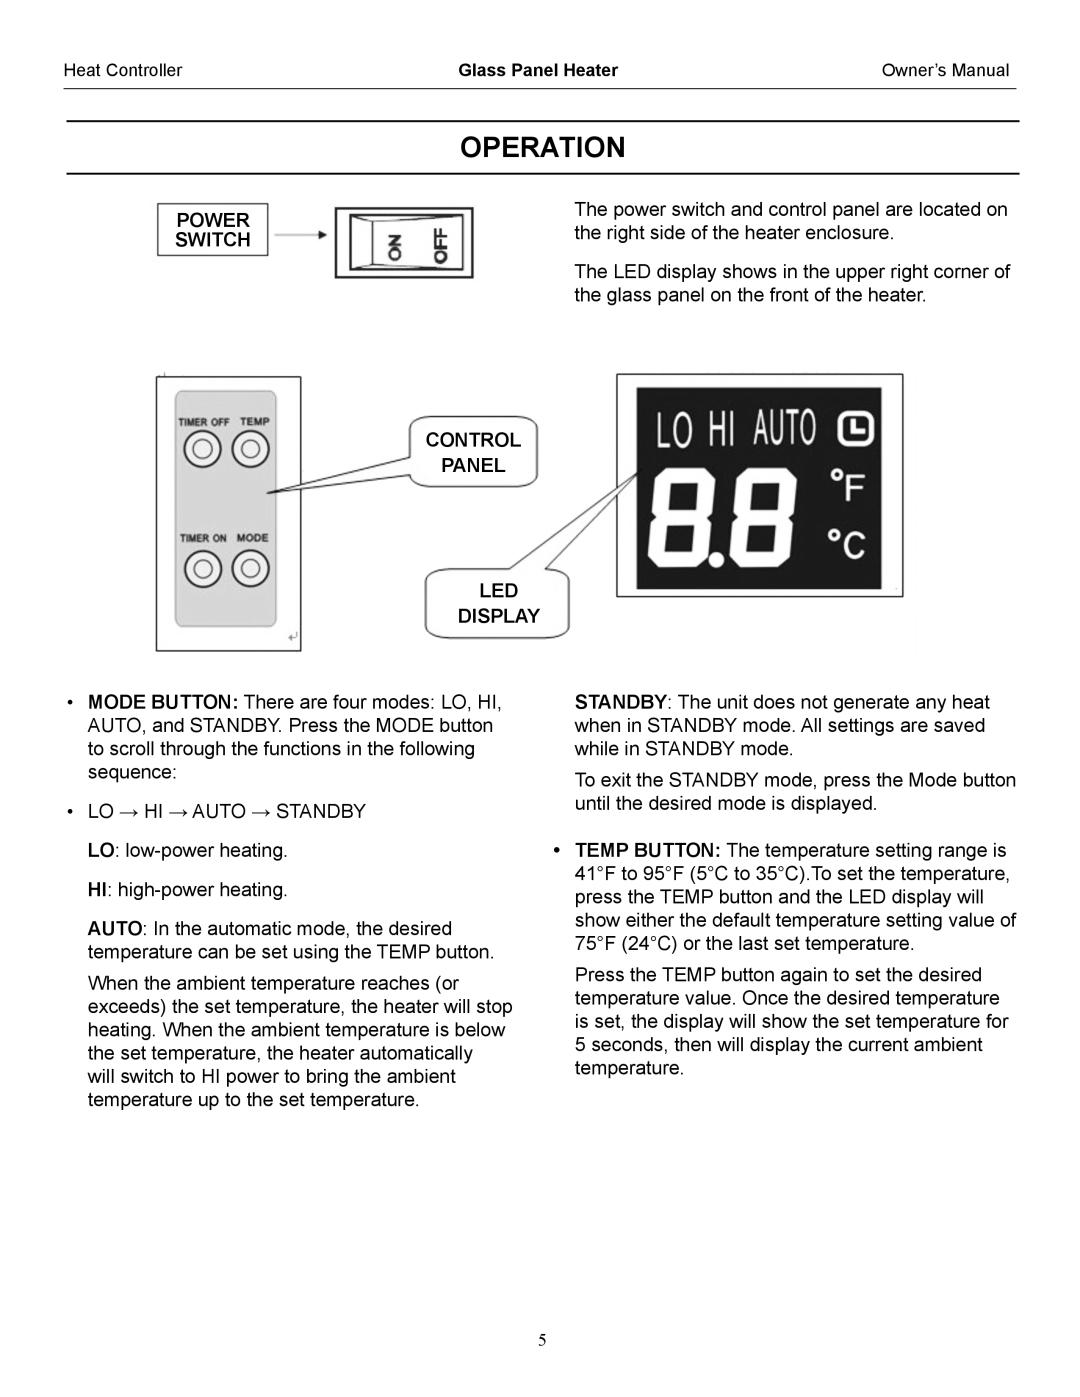 Heat Controller IRGPH15B operation manual Operation, Power Switch, Control Panel Led Display 